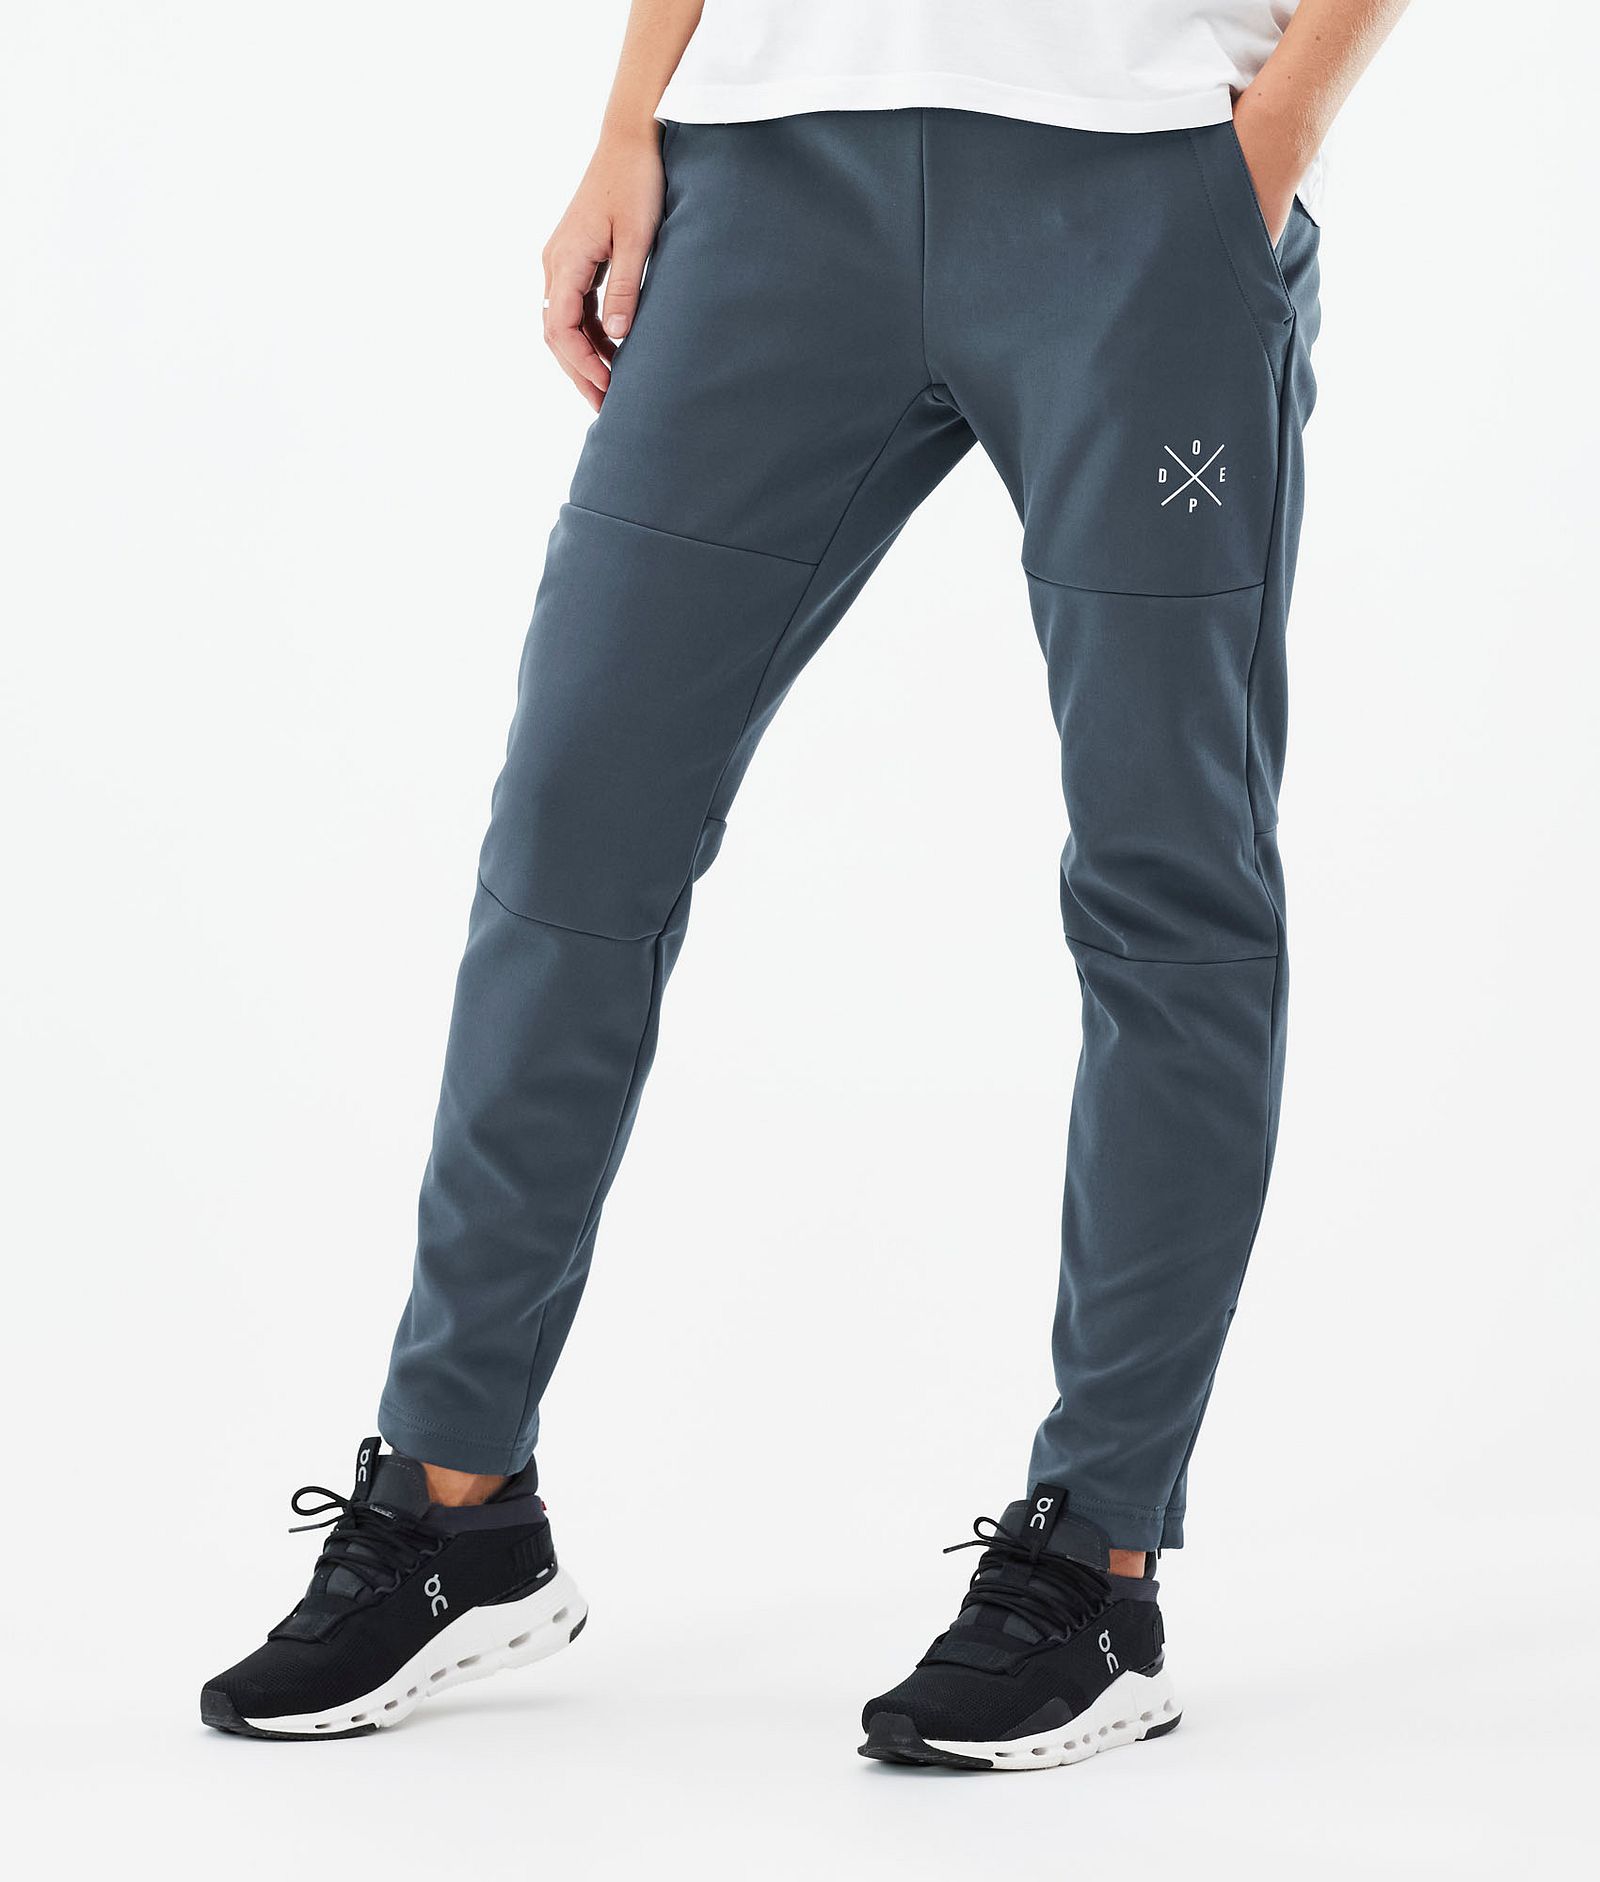 Dope Nomad W Pantalones Outdoor Mujer Metal Blue